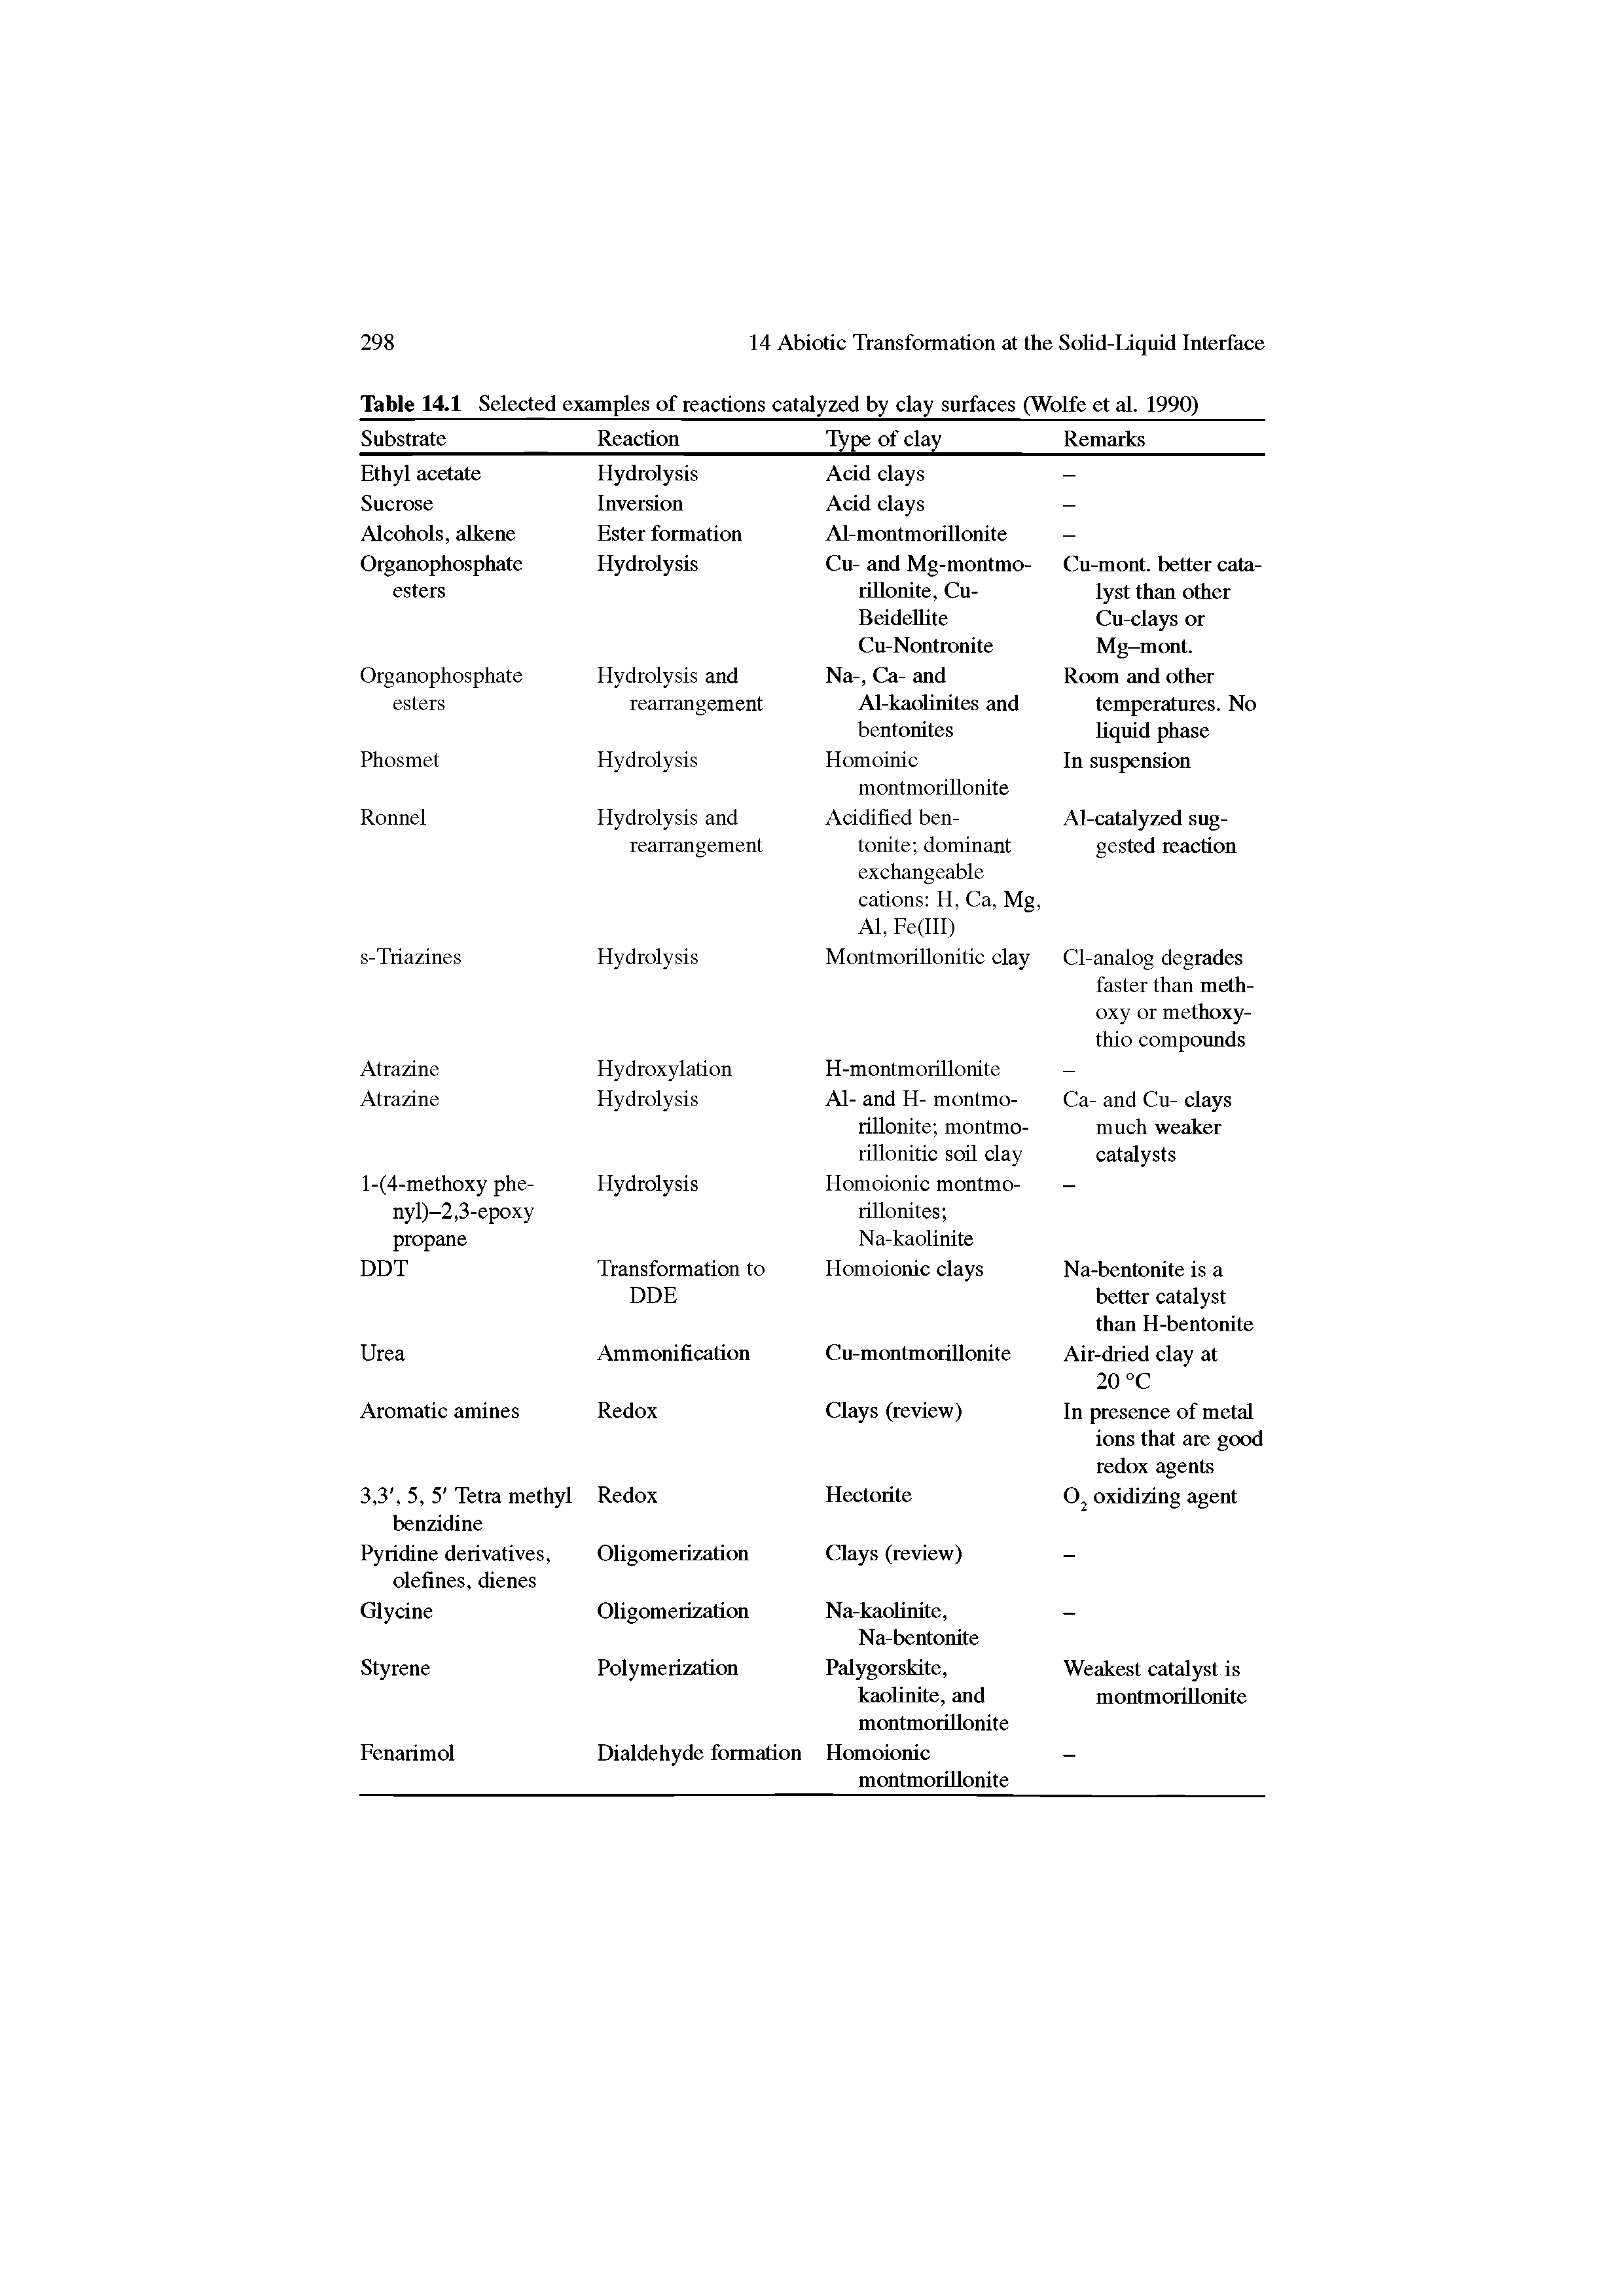 Table 14.1 Selected examples of reactions catalyzed by clay surfaces (Wolfe et al. 1990)...